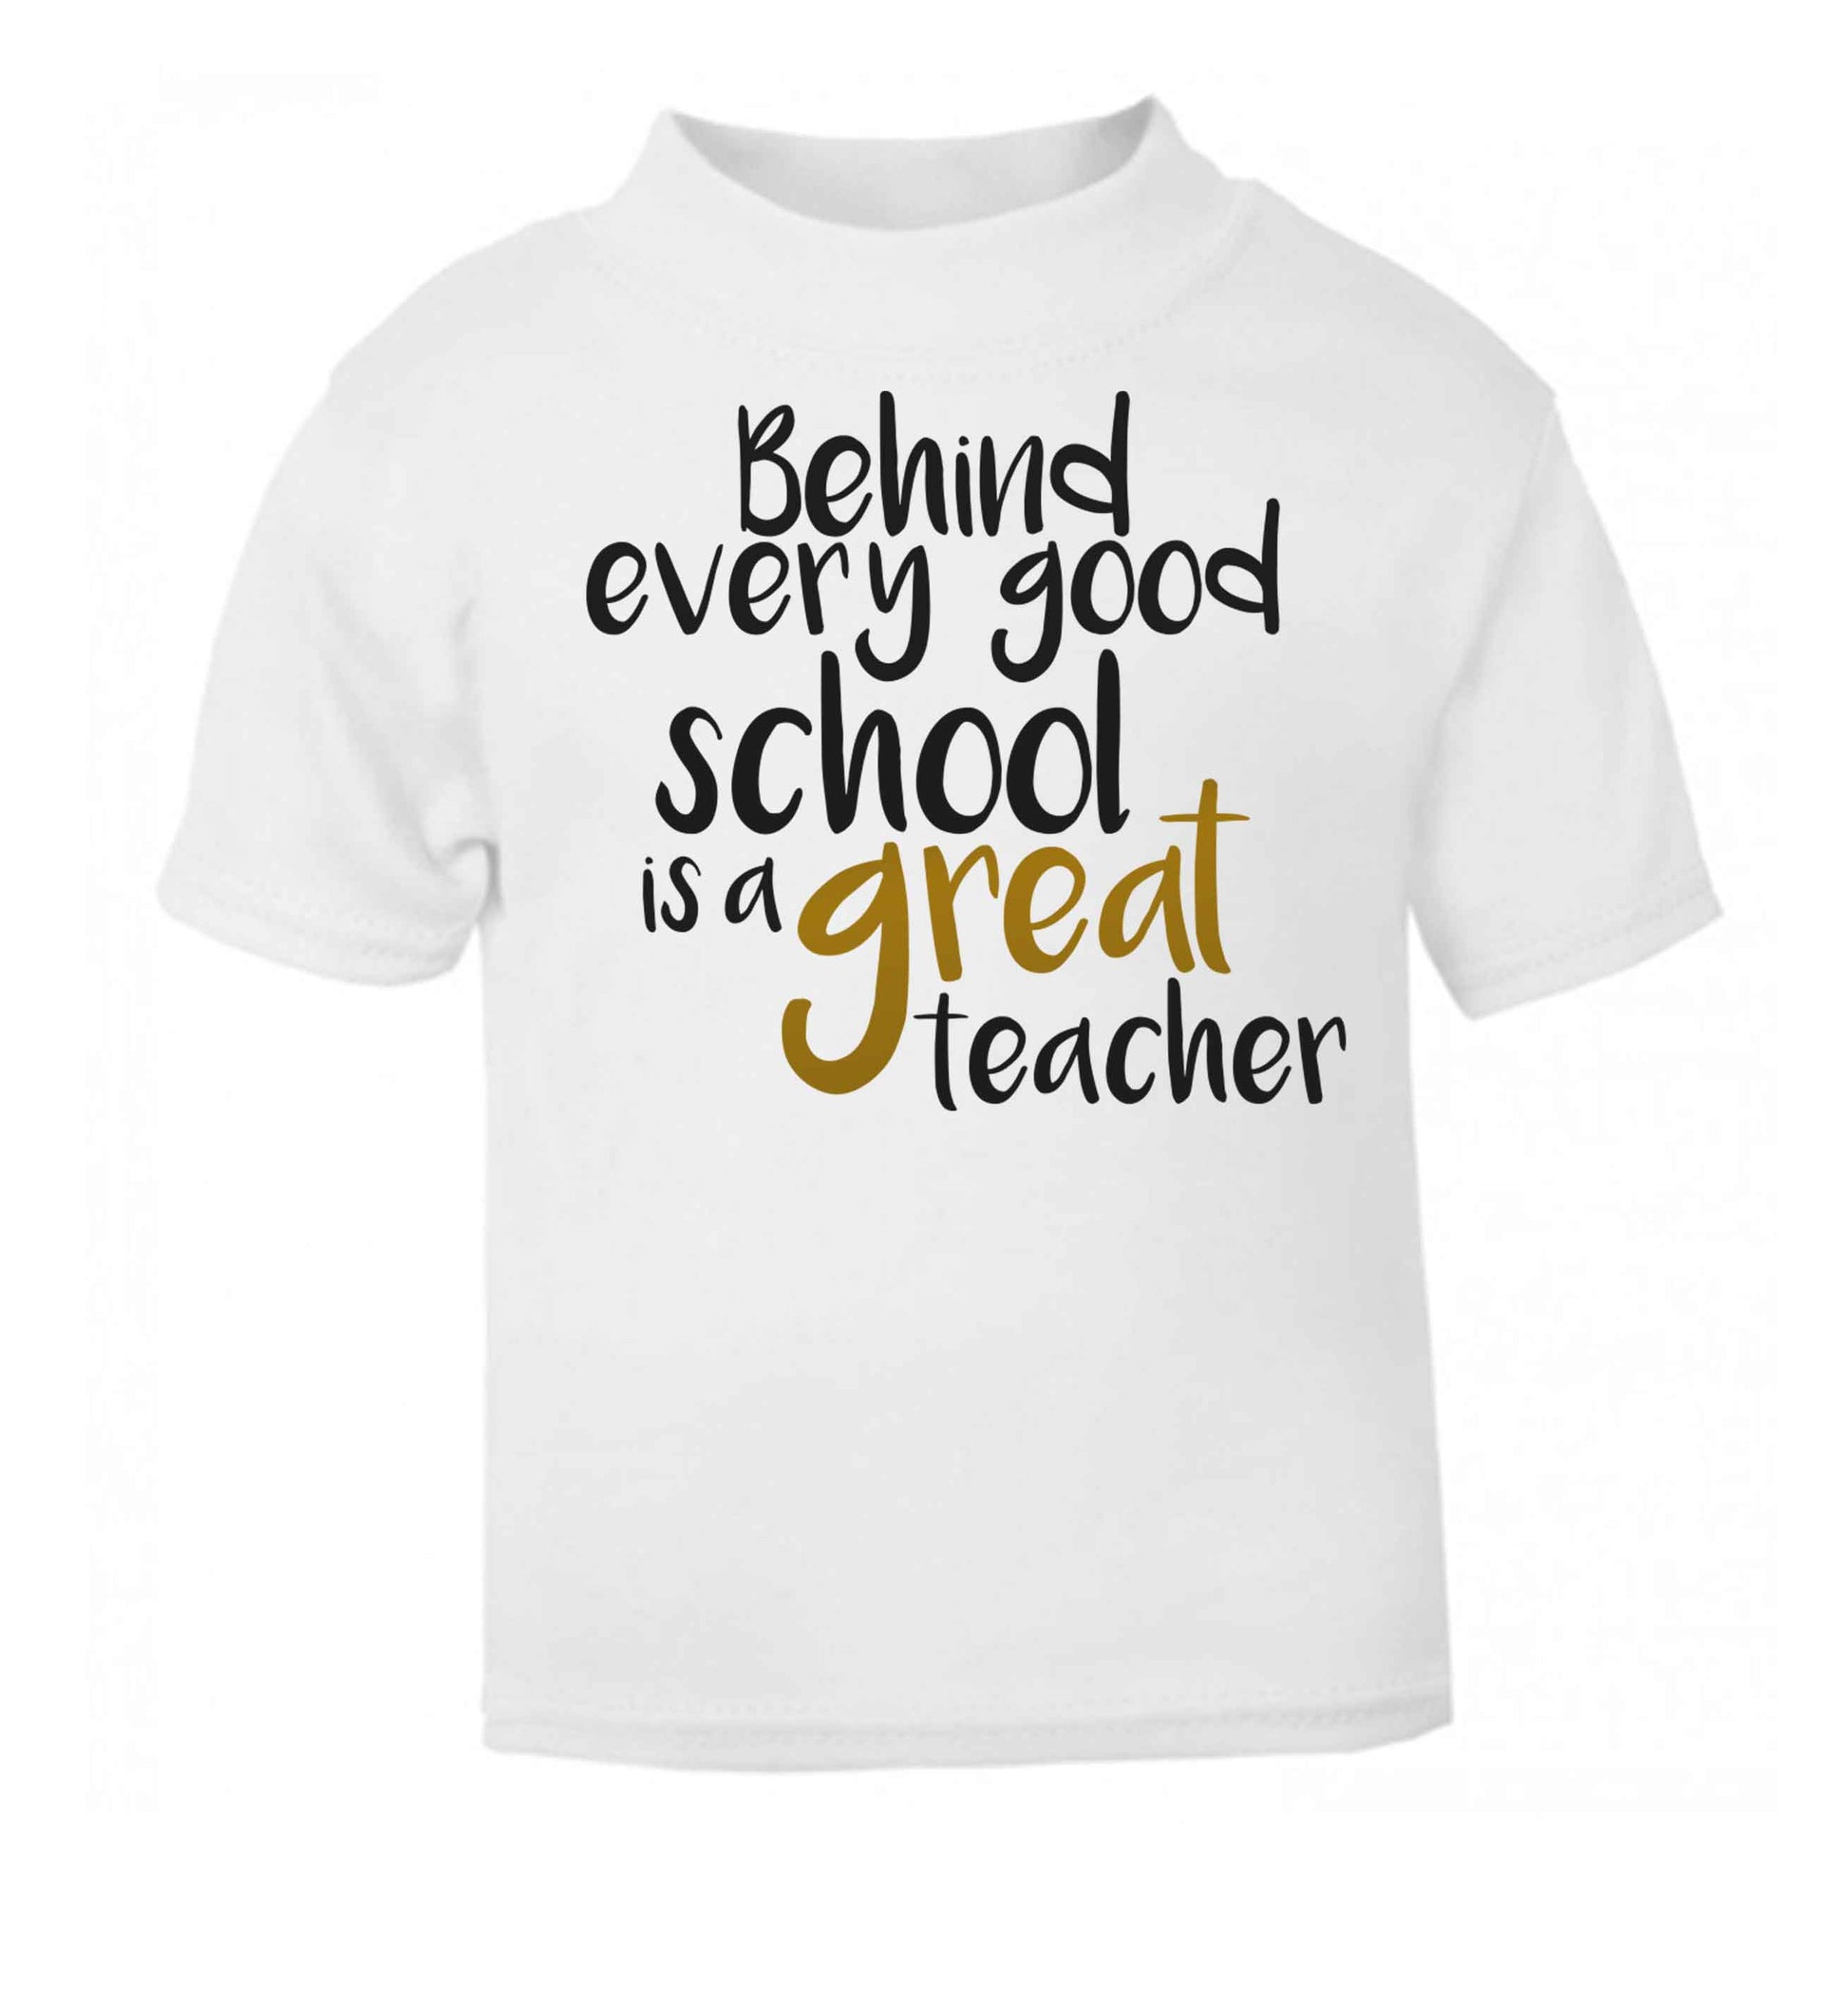 Behind every good school is a great teacher white baby toddler Tshirt 2 Years